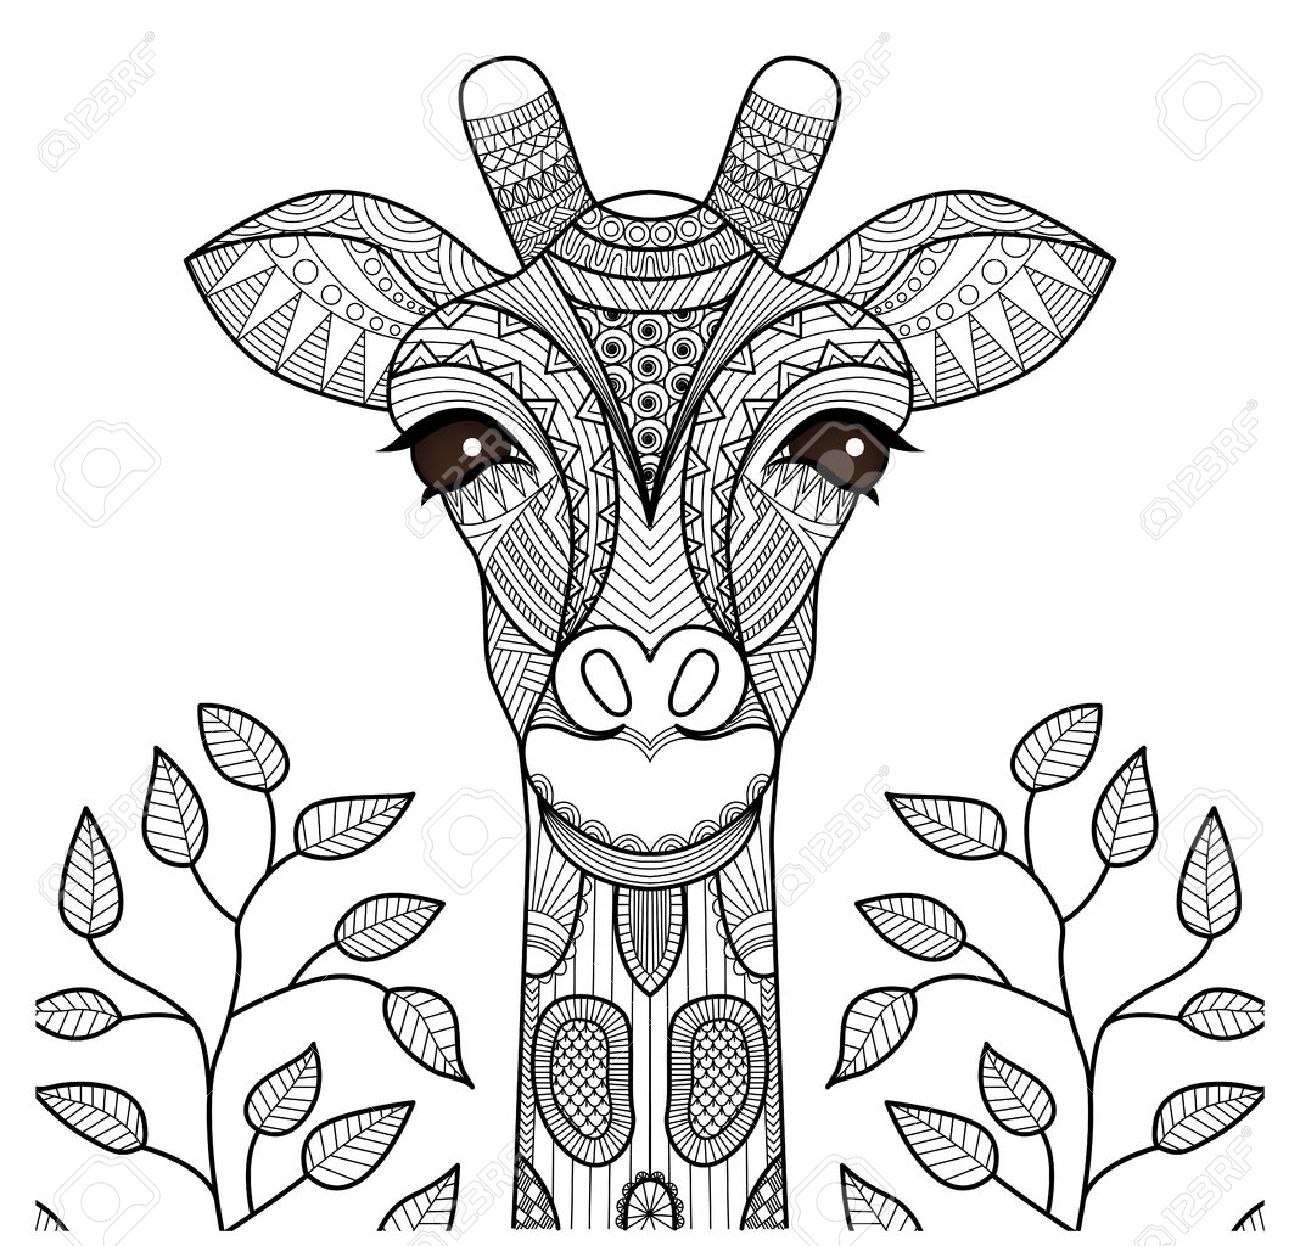 Zentangle giraffe head for coloring page shirt design and so on royalty free svg cliparts vectors and stock illustration image